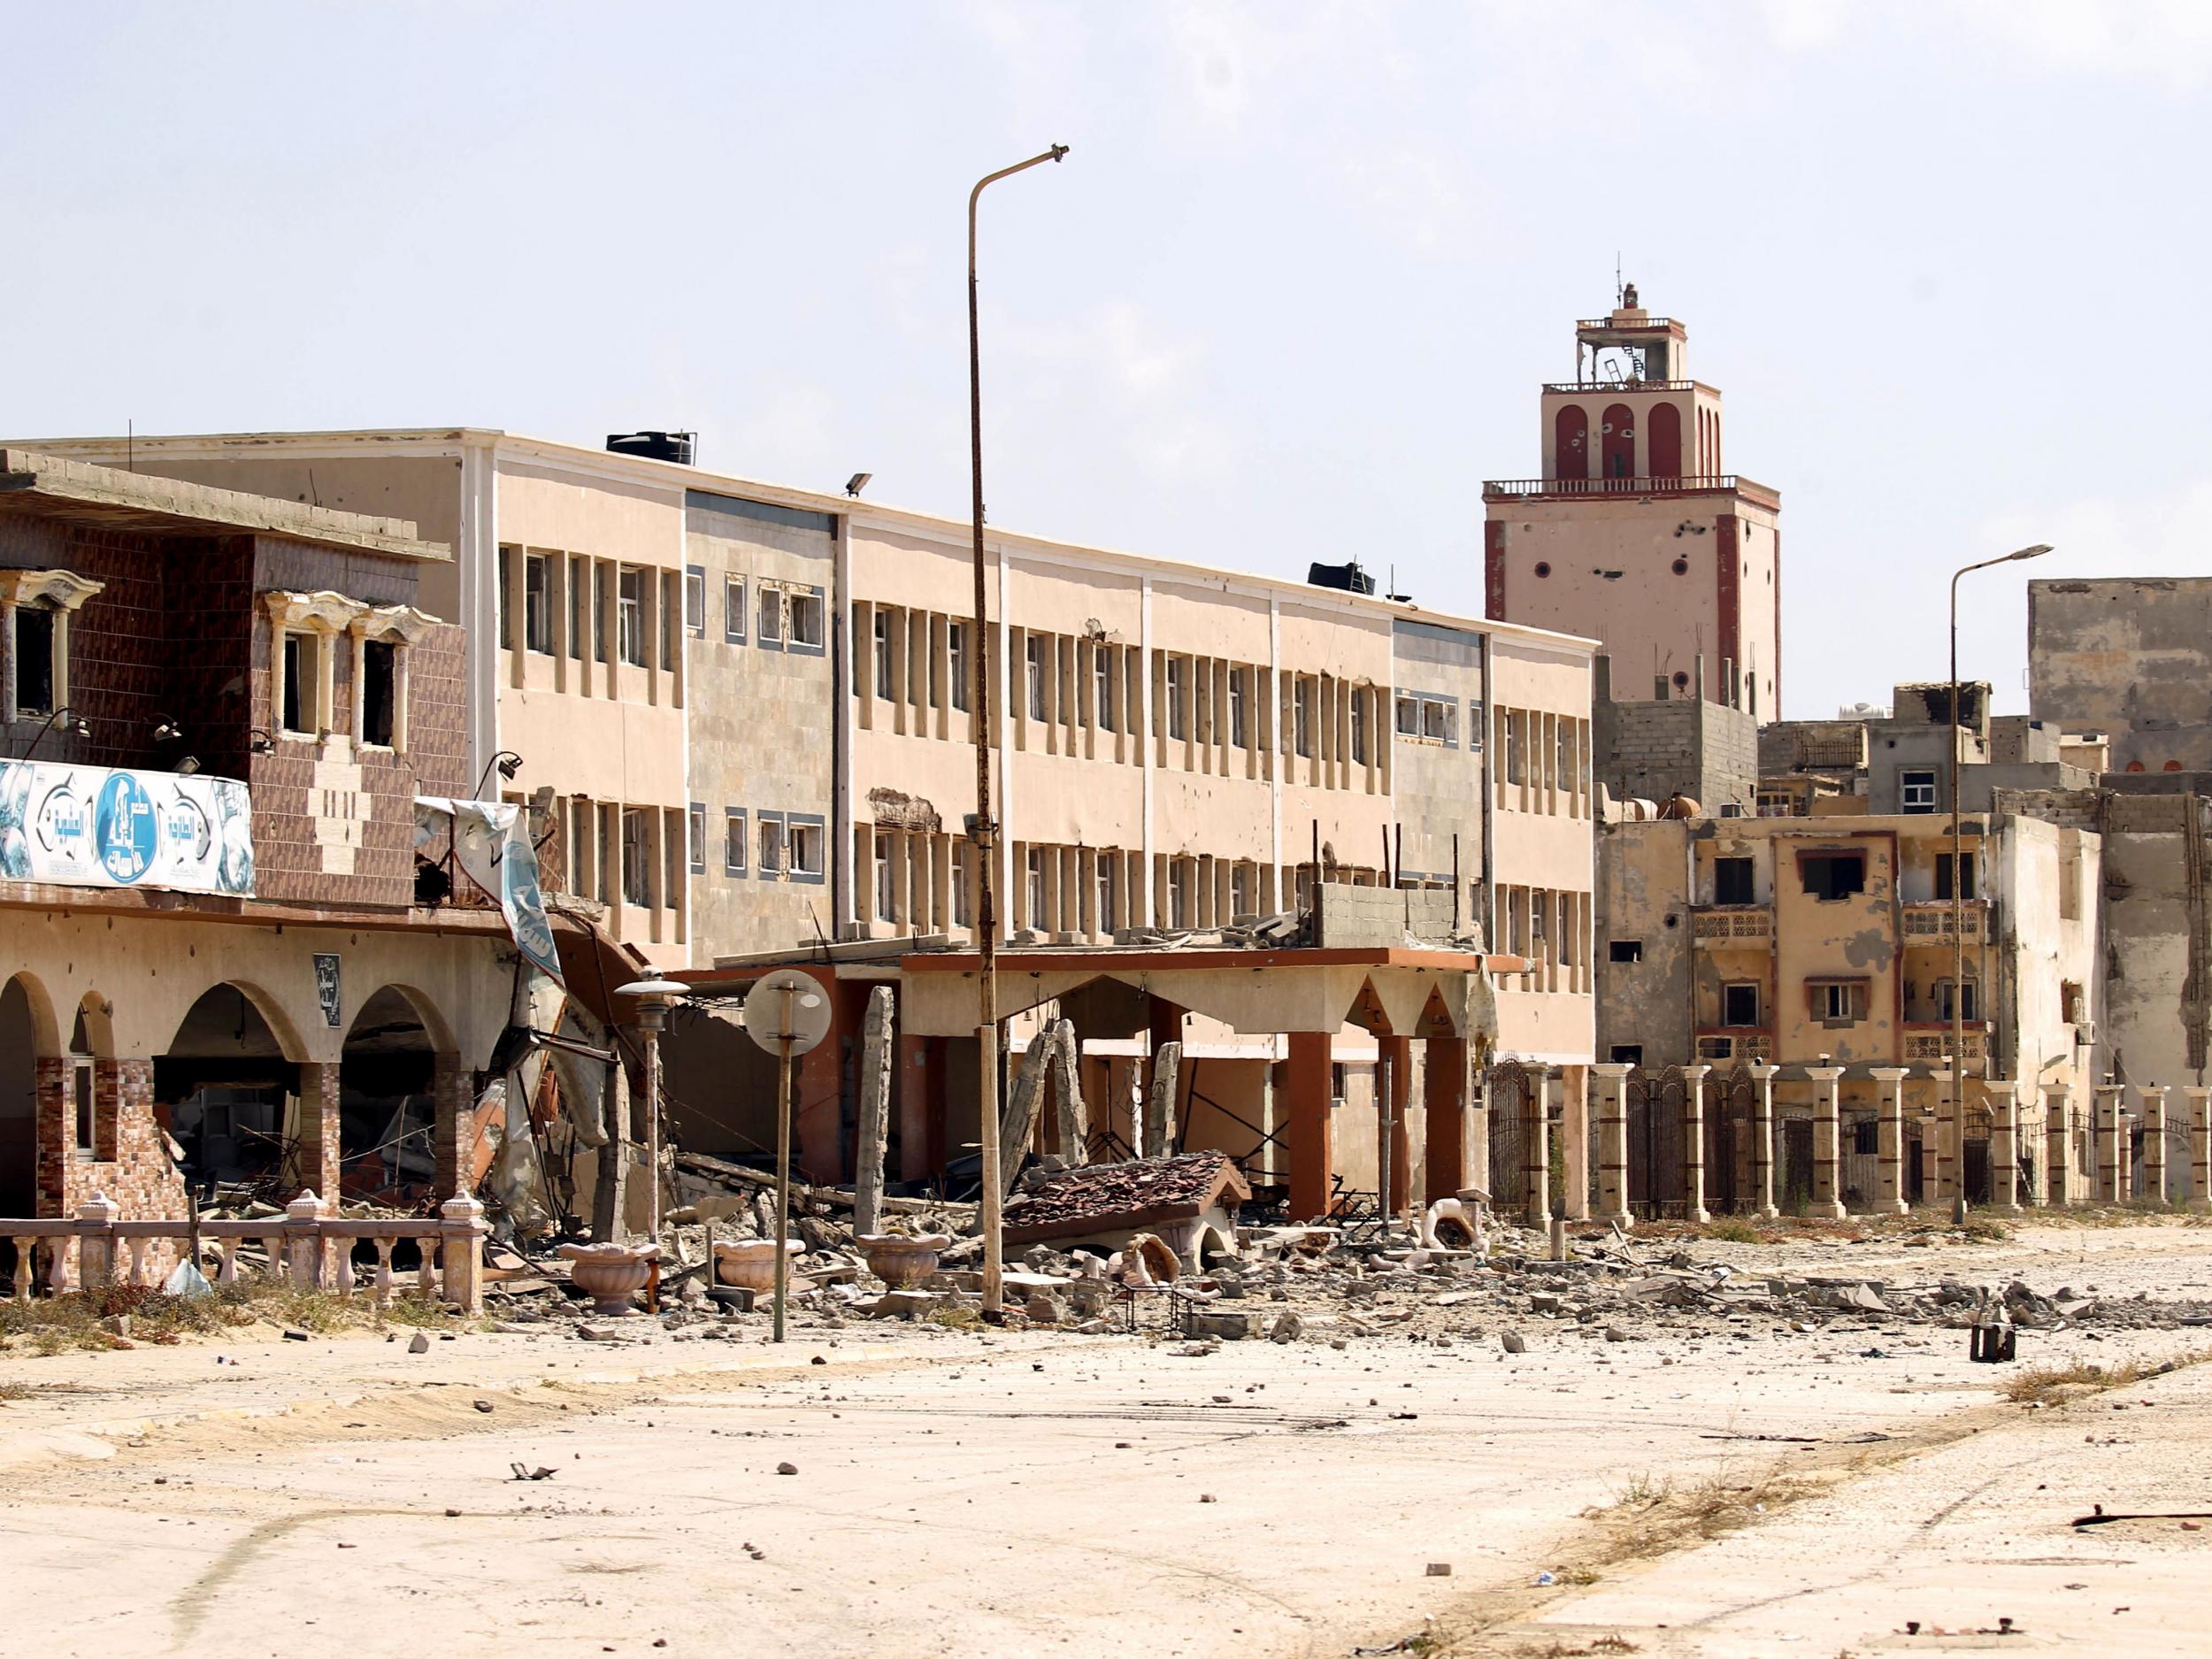 A stock image taken in July 2017, which shows the damage in the Libyan city of Benghazi after warfare raged from 2014 until late last year